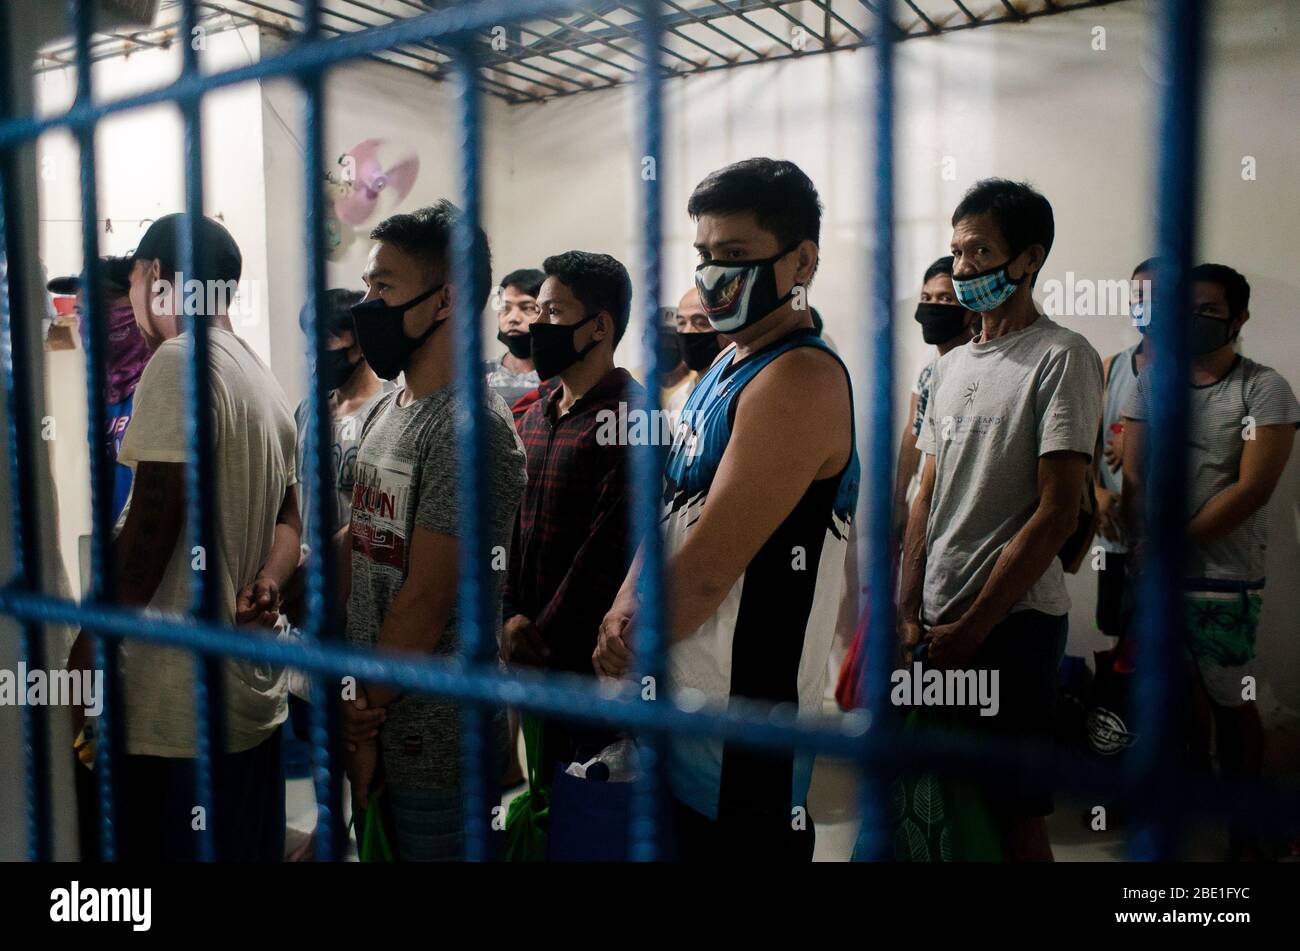 April 6, 2020 - Manila, Philippines: Detainees from Sitio San Roque, Quezon City await to be released on bail from Camp Karingal's detention center on April 6, 2020. Twenty-one residents were arrested for illegal assembly during an emergency health crisis during the enhanced community quarantine in Metro Manila to fight spread of COVID-19. On April 1, 2020, residents of Sitio San Roque gathered together to protest failings of the Duterte administration and local government to provide sufficient relief goods to their community. After a 15-minute warning, the Quezon City Police violently dispers Stock Photo